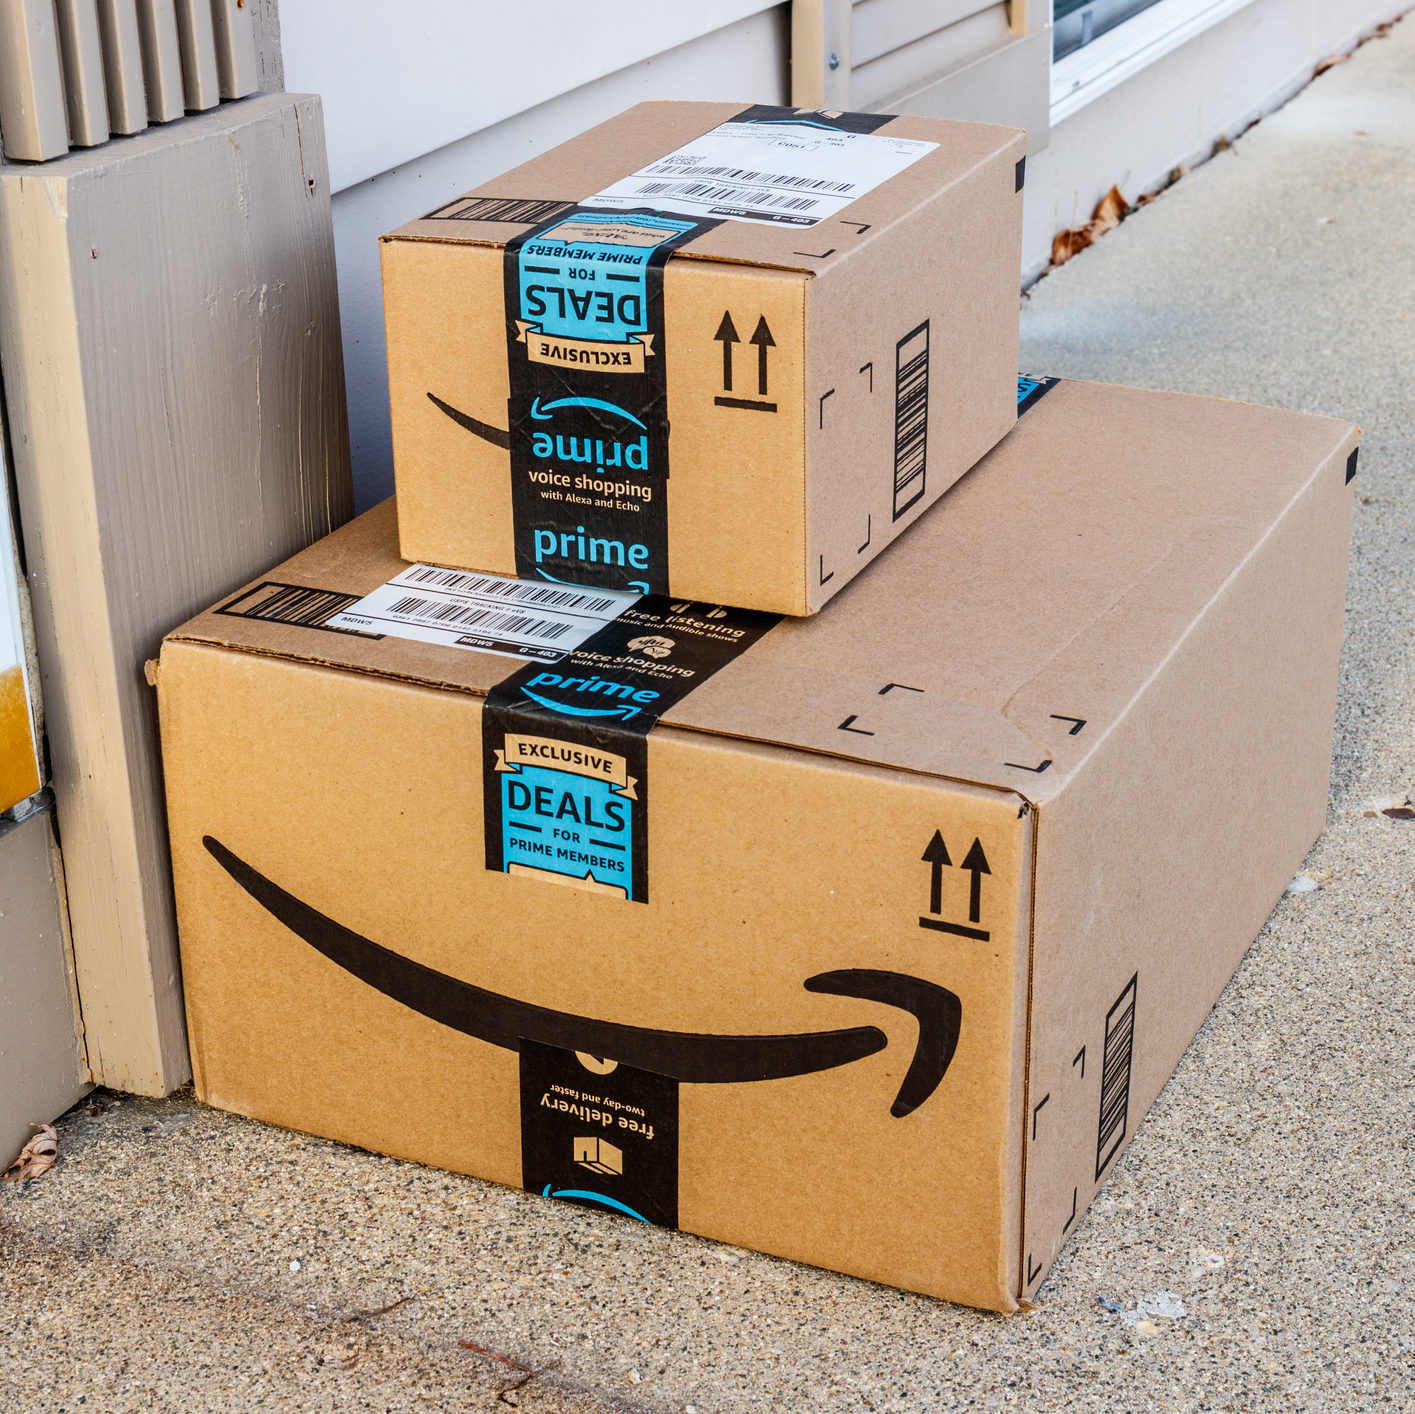 Veterans and military members can get 1 year of Amazon Prime for $79